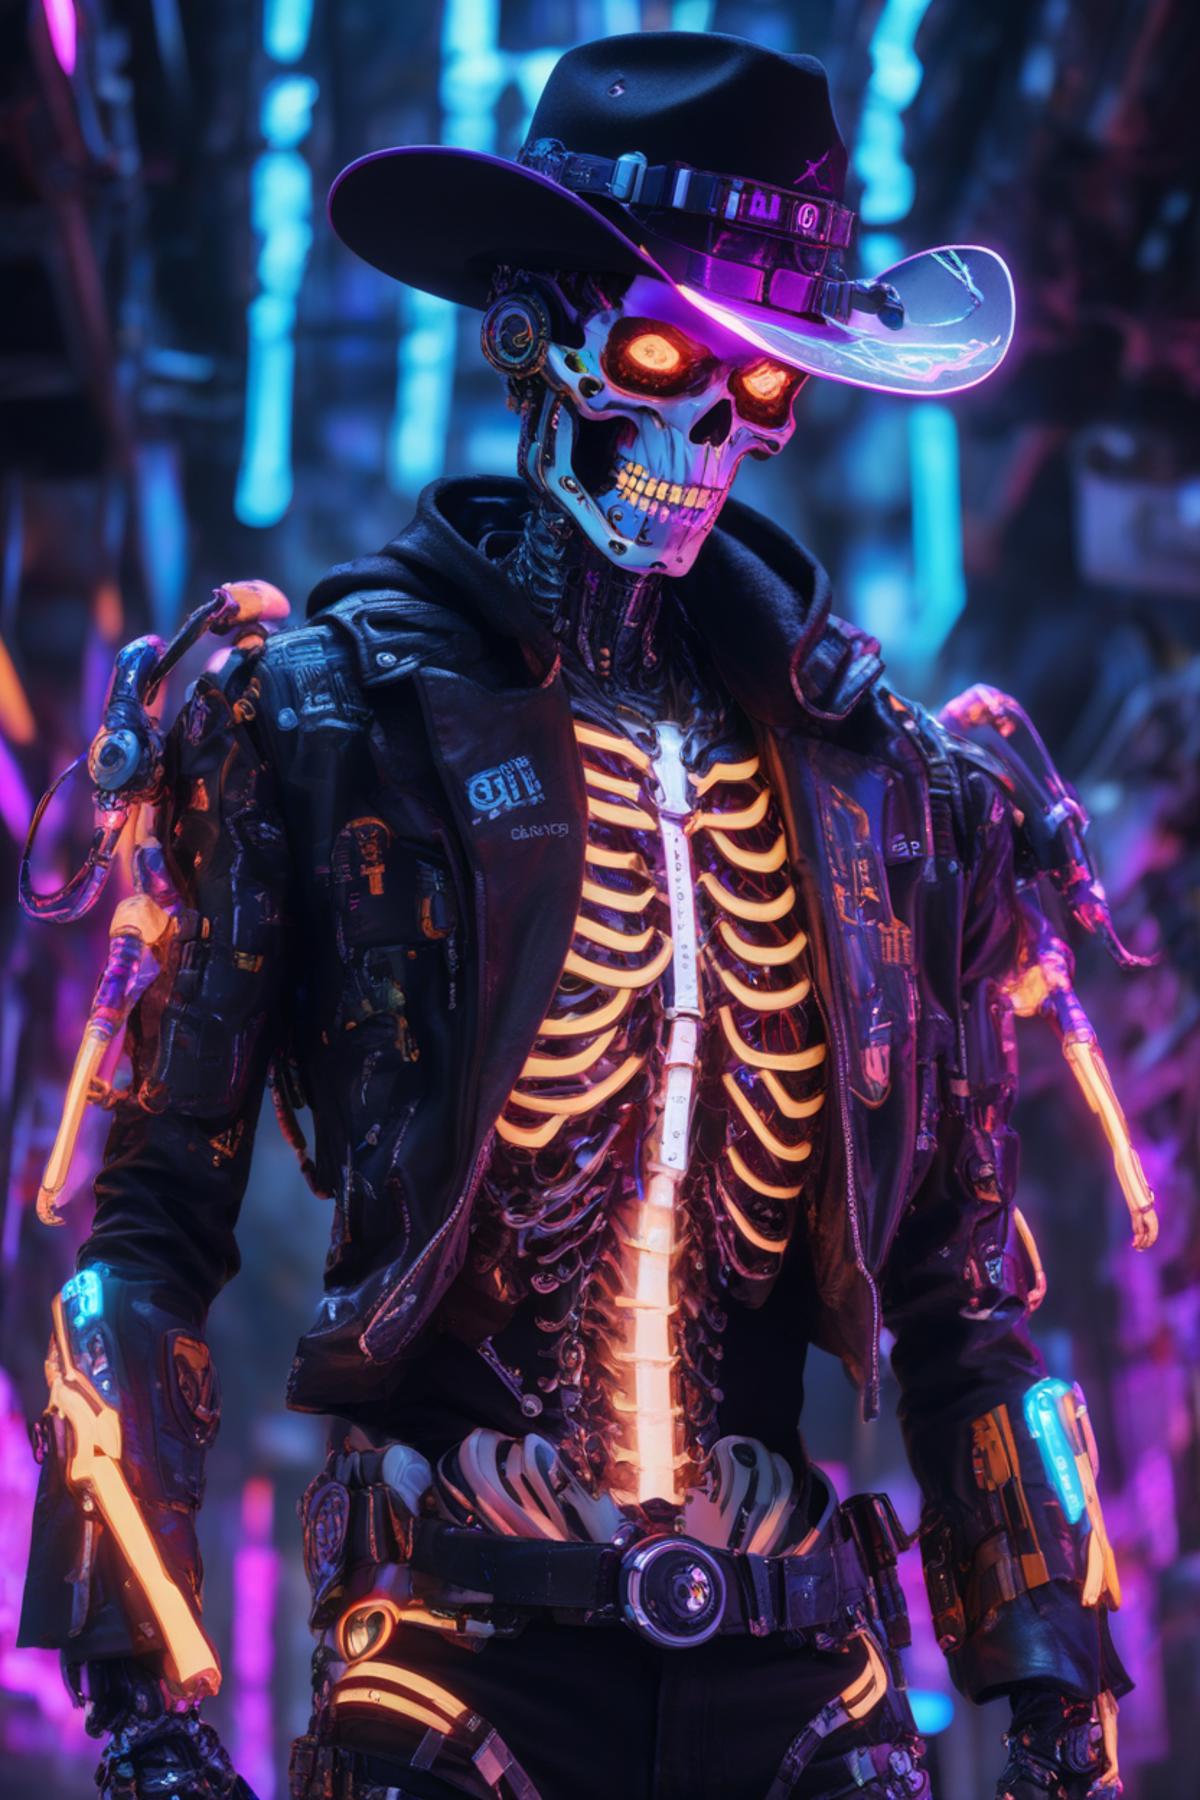 A cyberpunk robot skeleton in a black jacket, hat, and glowing eyes.